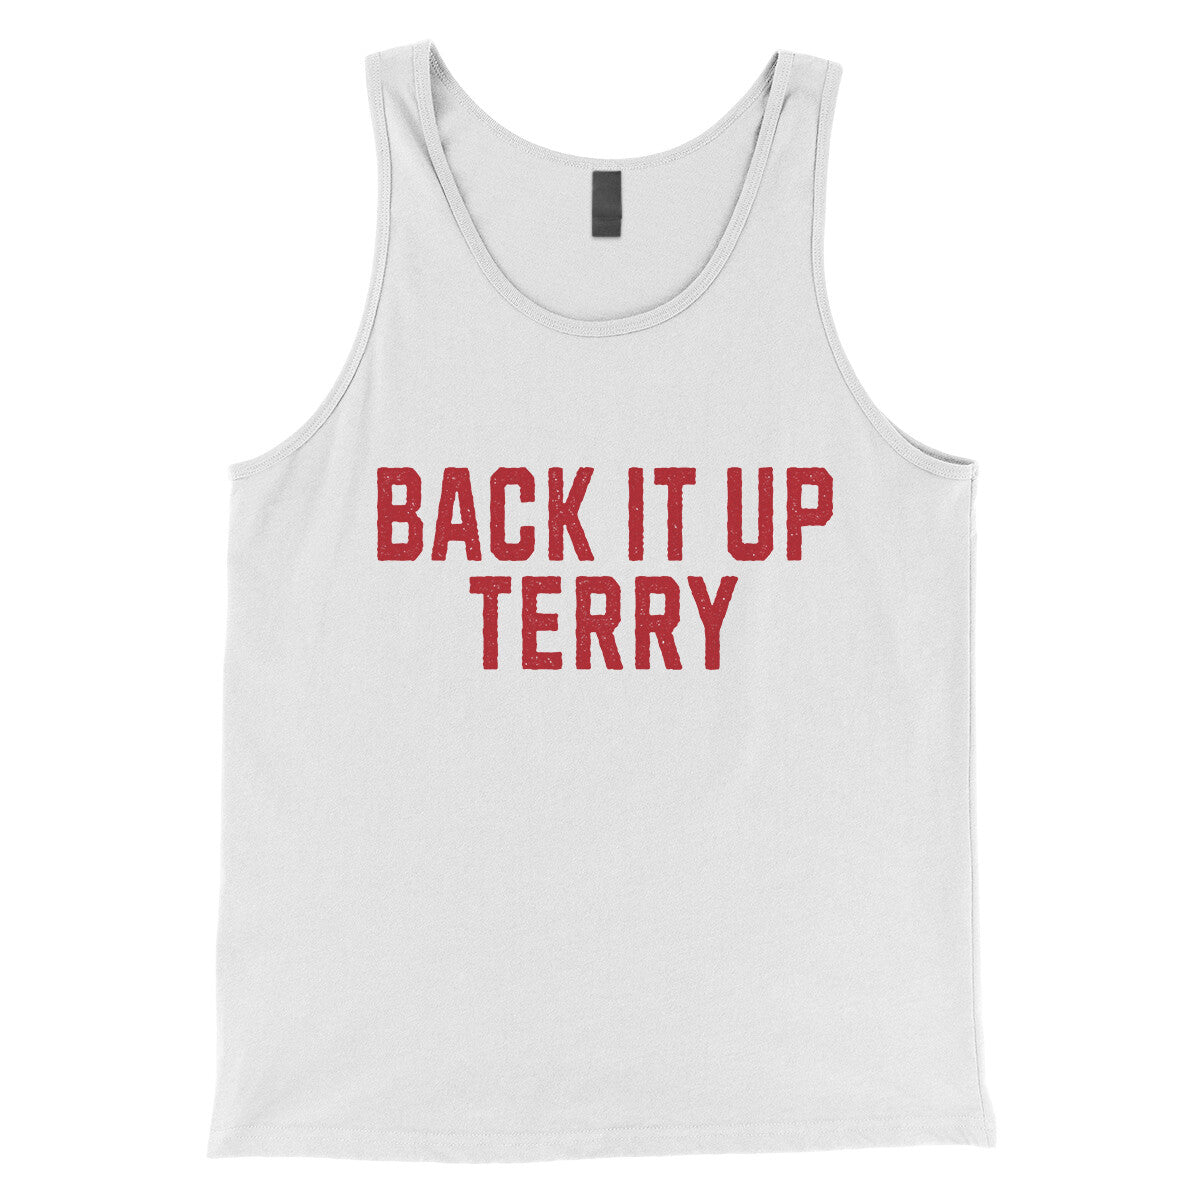 Back it up Terry in White Color